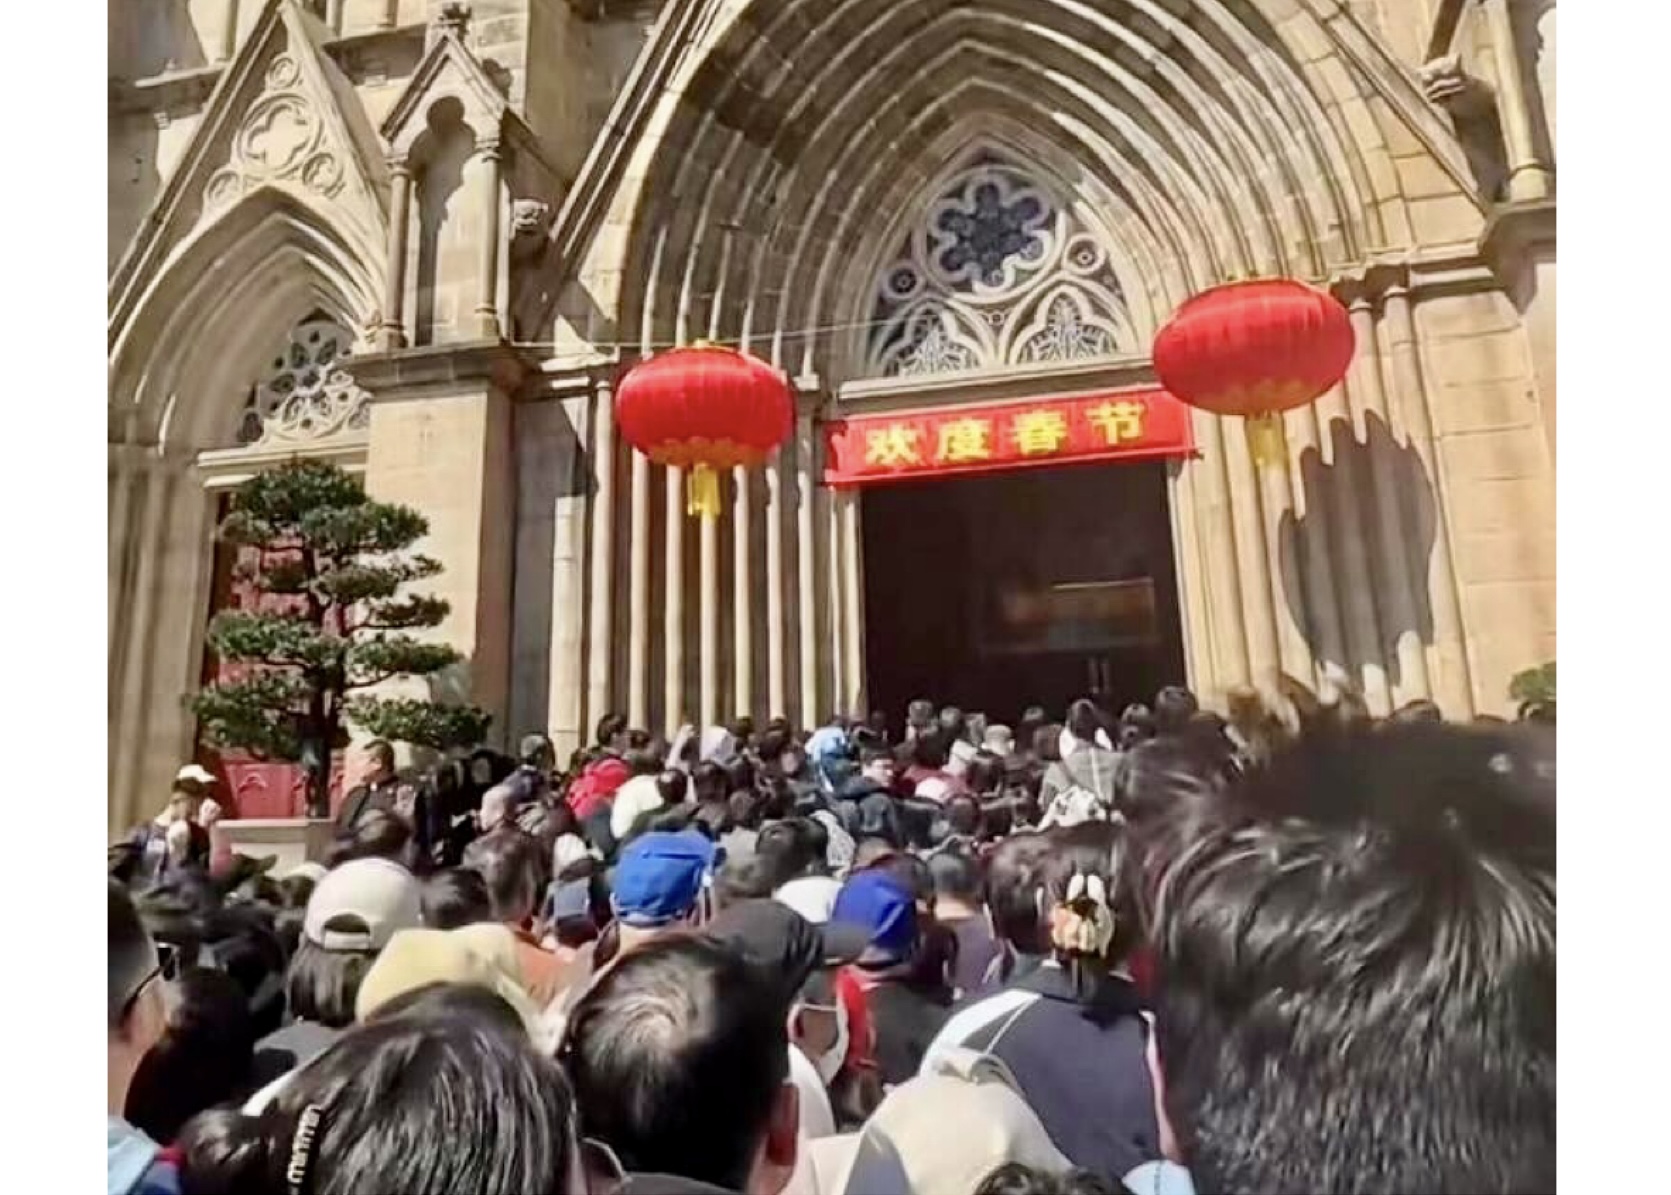 A screenshot from the short video showing the crowded scene of tourists at Sacred Heart Cathedral, Guangzhou, Guangdong